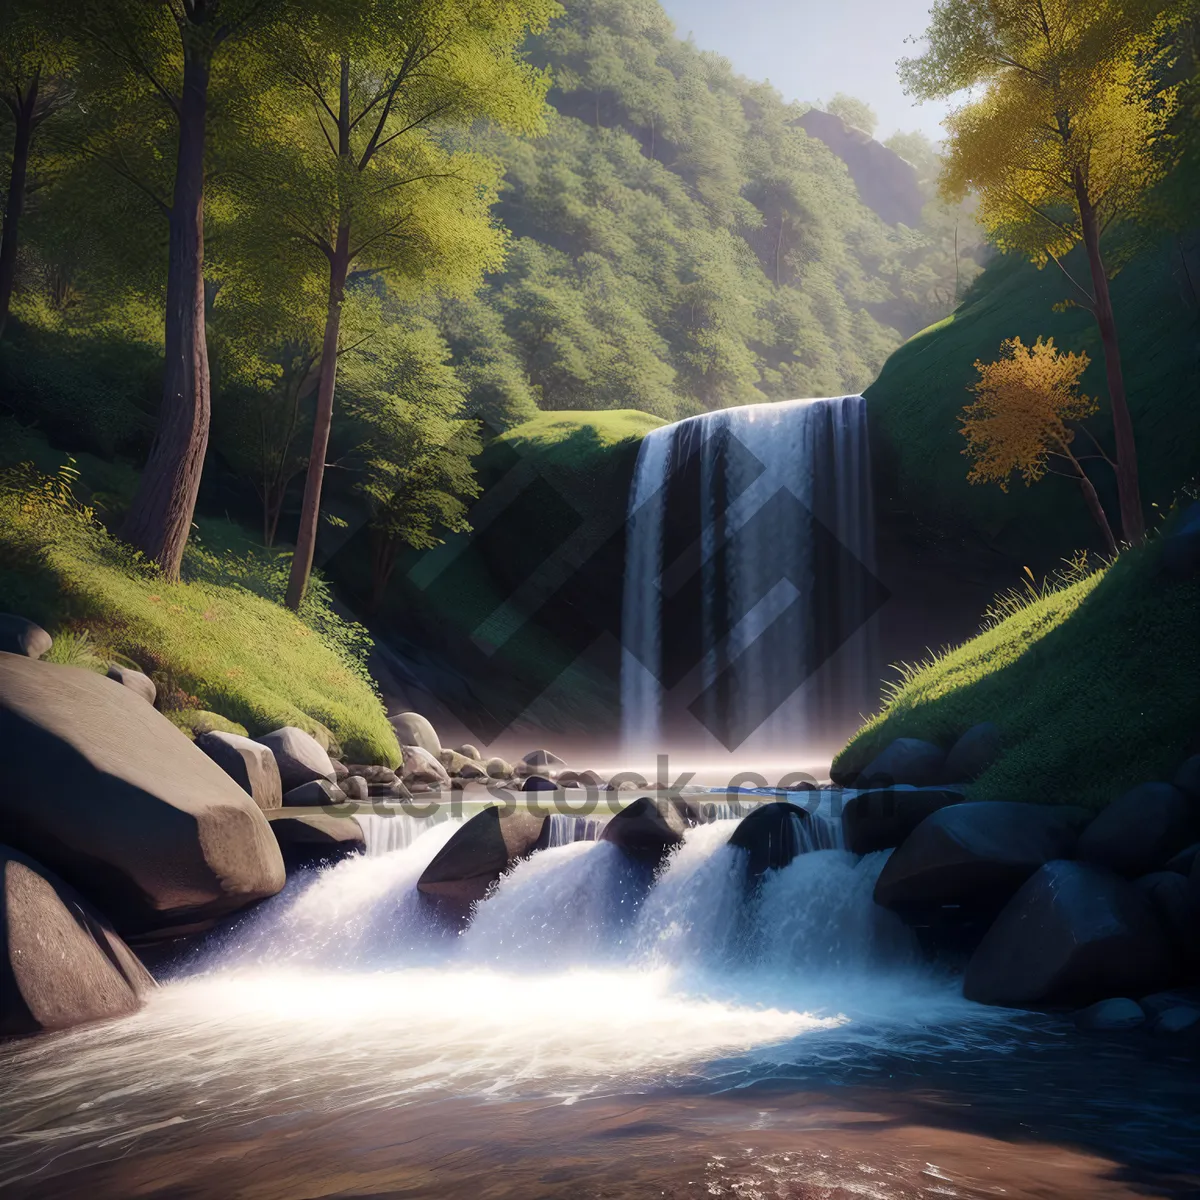 Picture of Tranquil Waterfall in Serene Forest"
"Mountain Cascade amidst Pristine Landscape"
"Gushing River Flowing through Mossy Creek"
"Wild Waterfall Cutting through Rocky Terrain"
"Scenic Waterfall in Majestic Nature Park